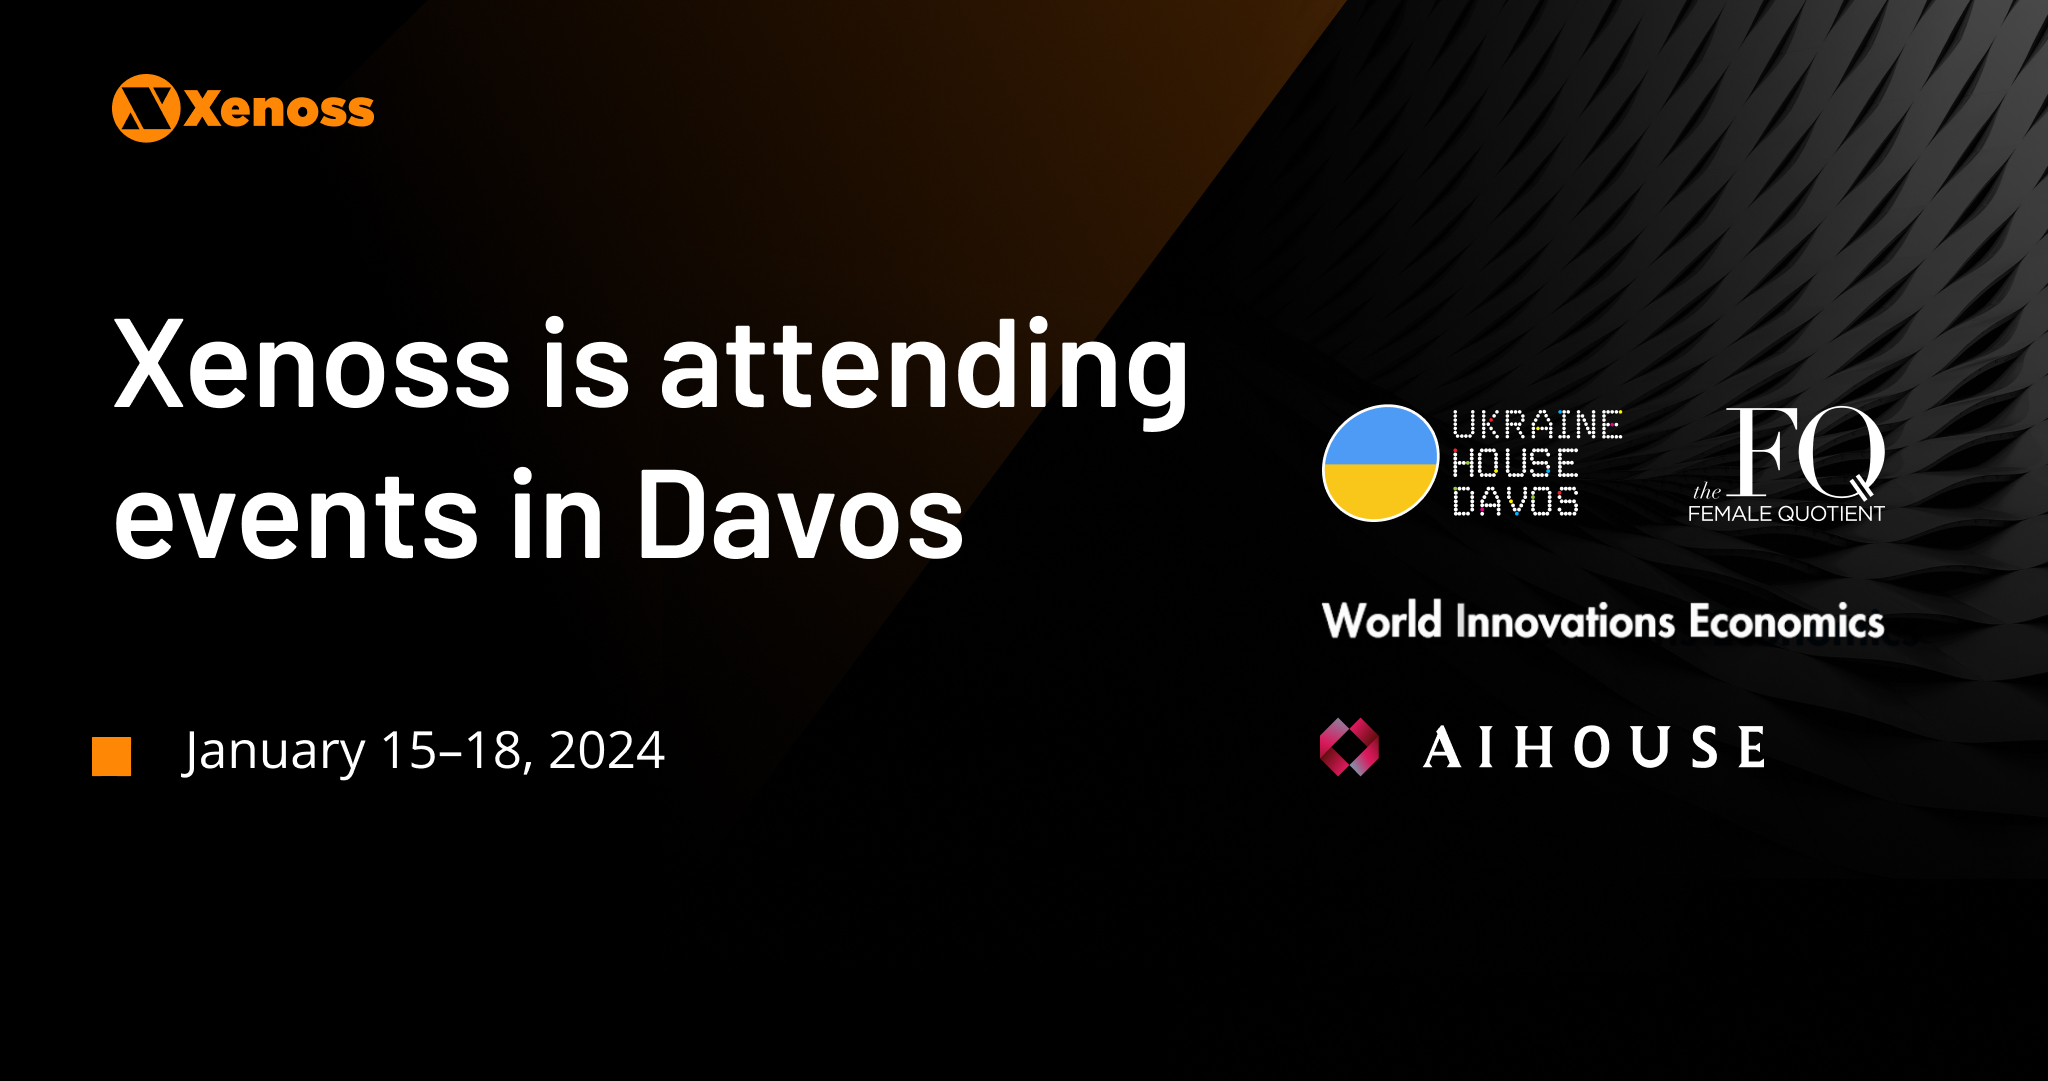 Conferences in Davos Xenoss will attend